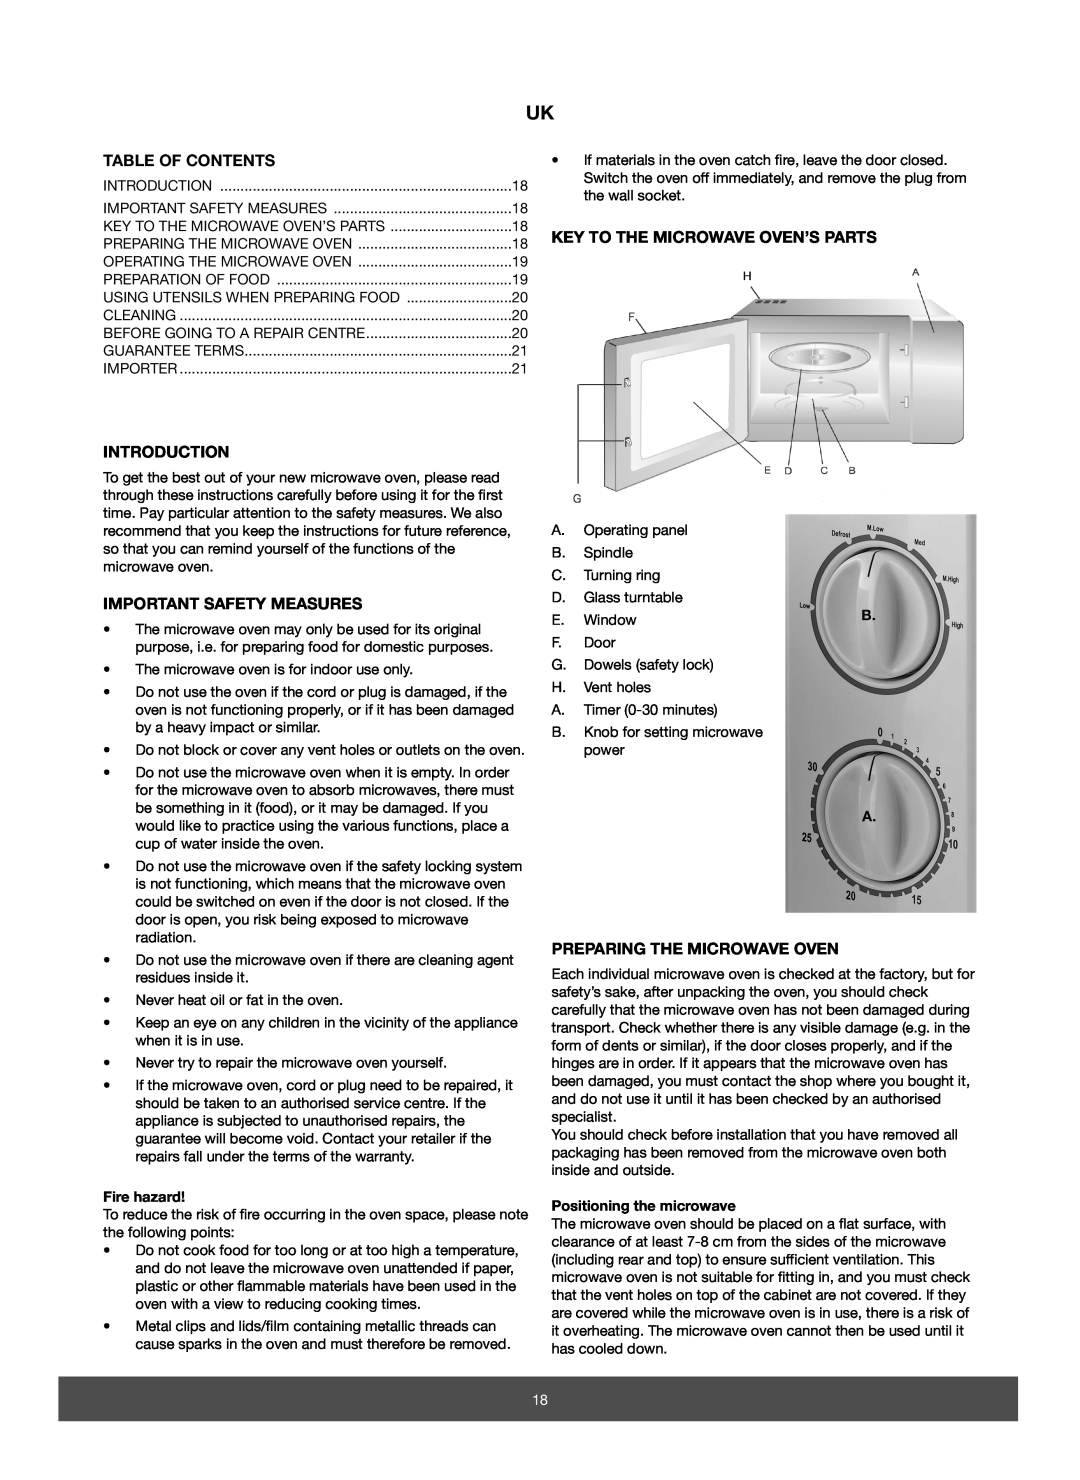 Melissa 653-067 Table Of Contents, Introduction, Important Safety Measures, Key To The Microwave Oven’S Parts, Fire hazard 